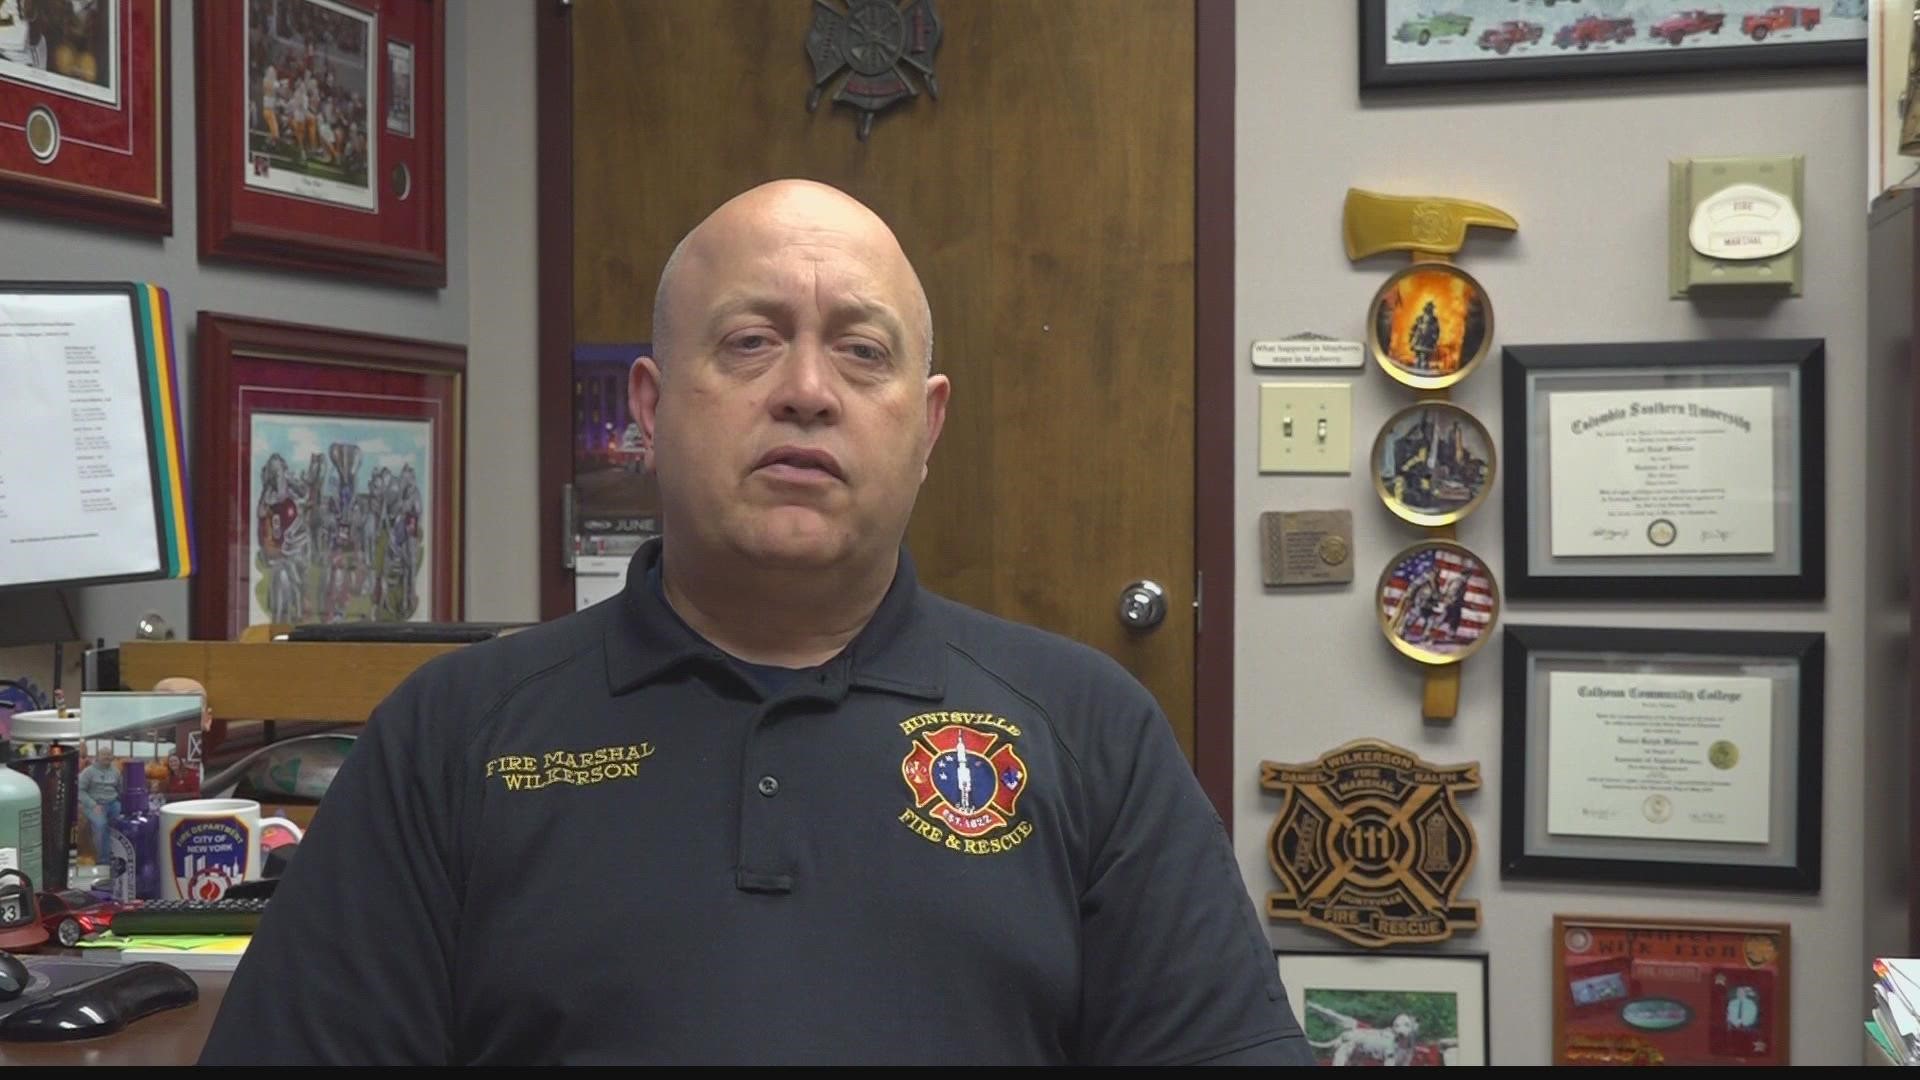 Dan Wilkerson, the Fire Marshal for the City of Huntsville shares that the loud noises could be traumatic for service members.